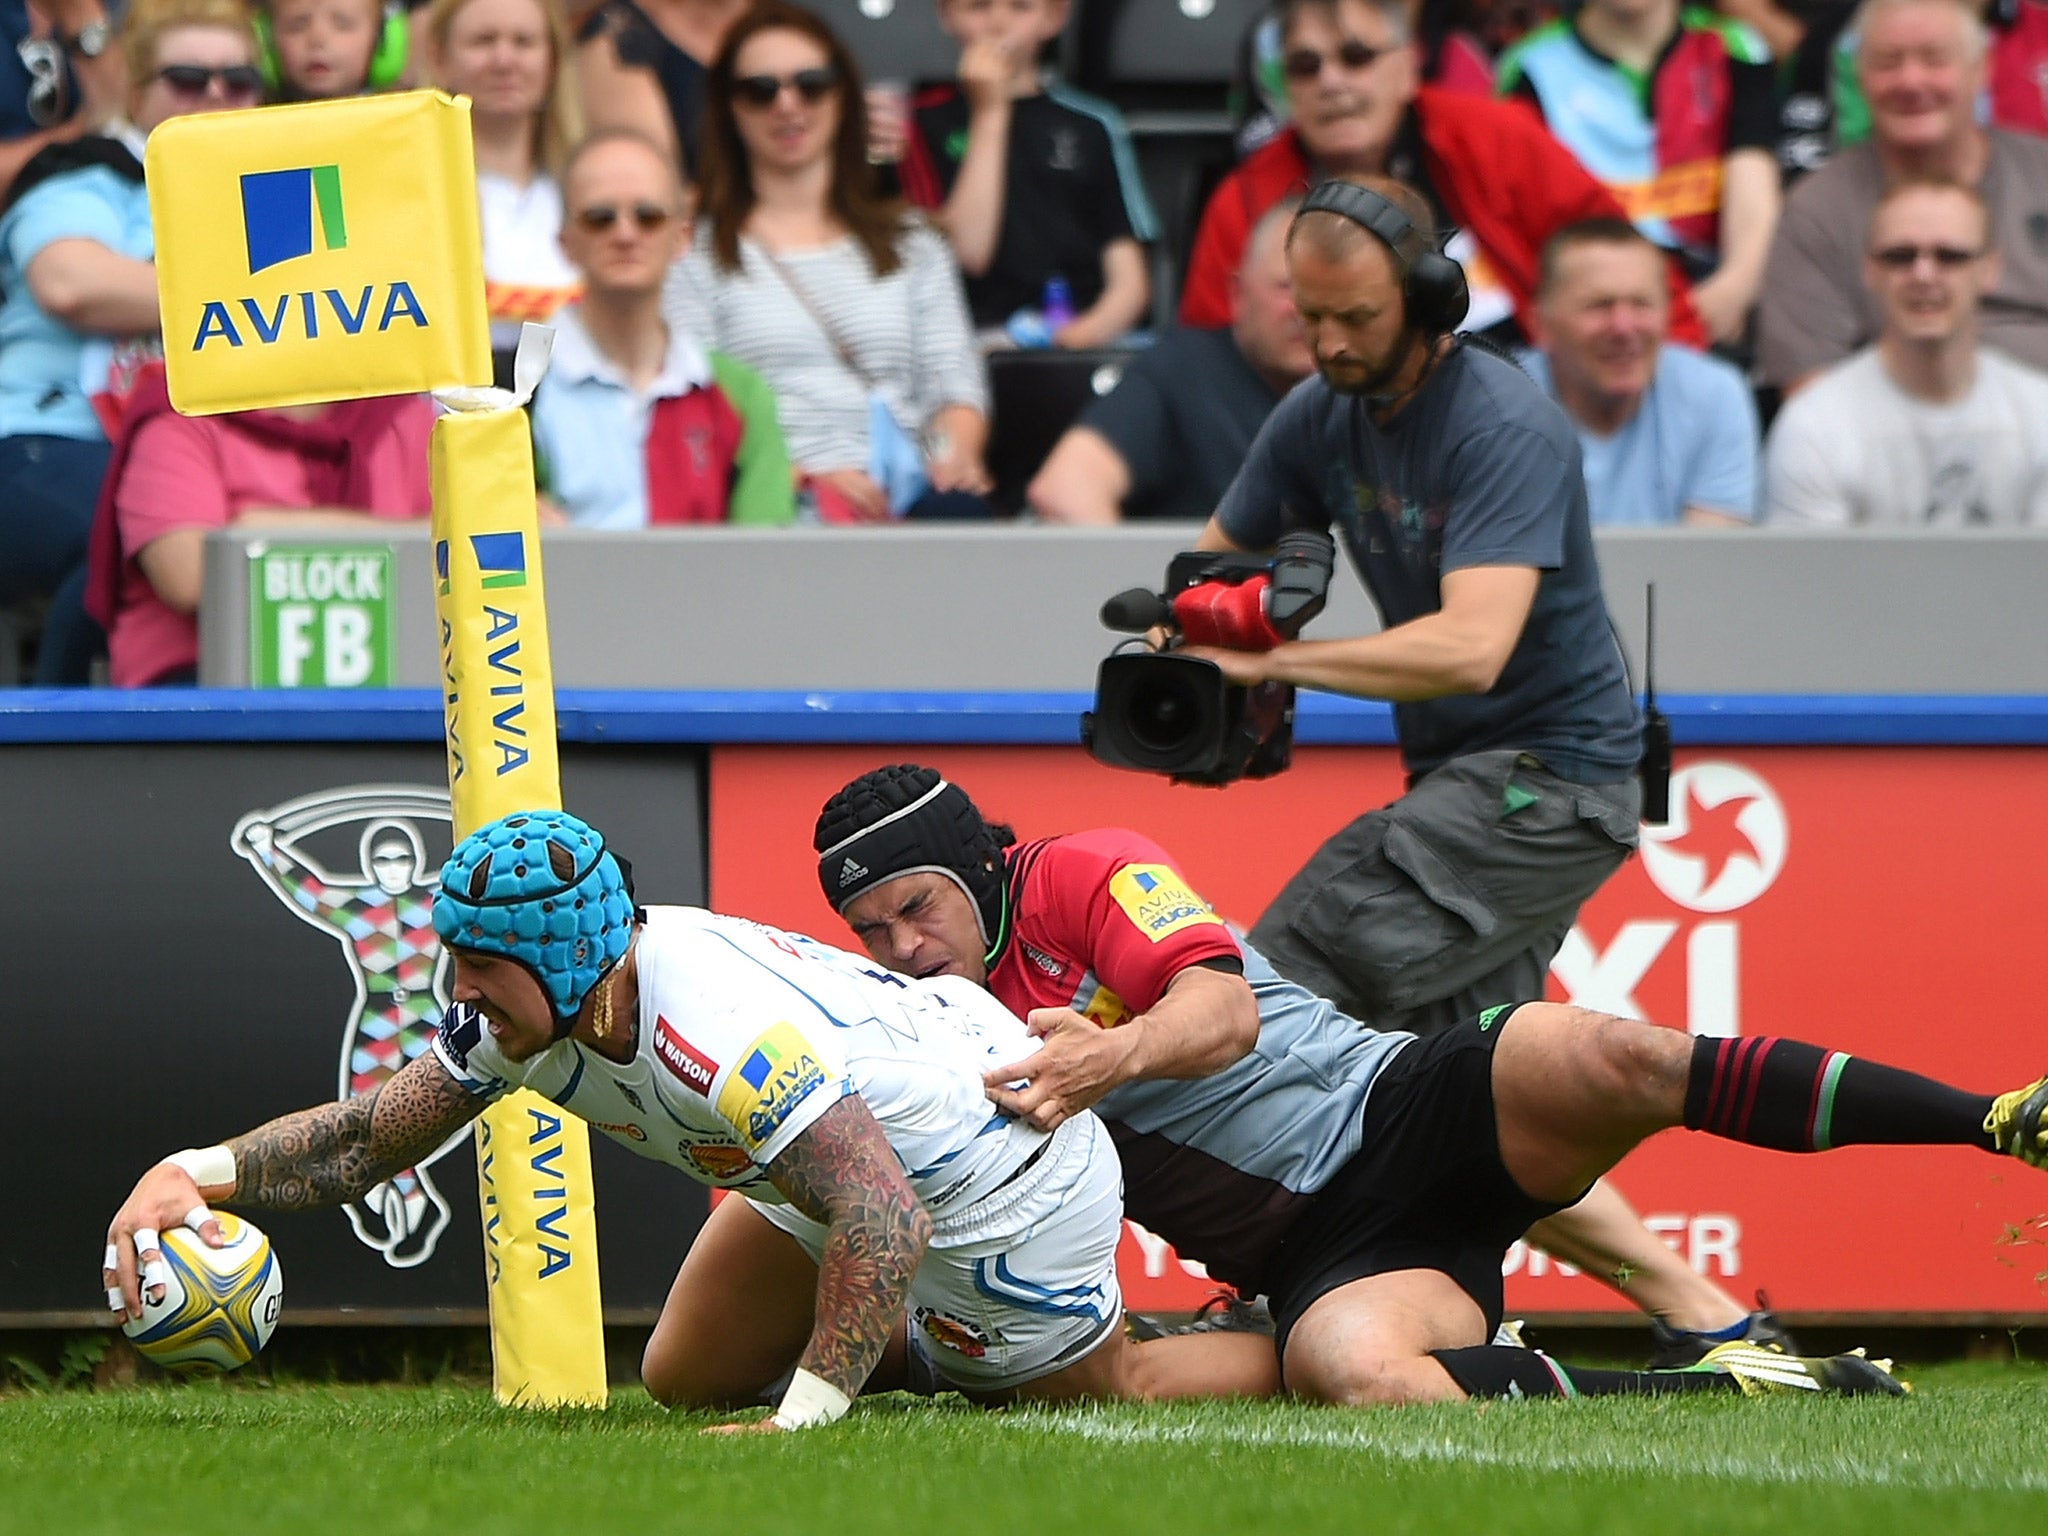 England wing Jack Nowell scores one of his three tries against Harlequins